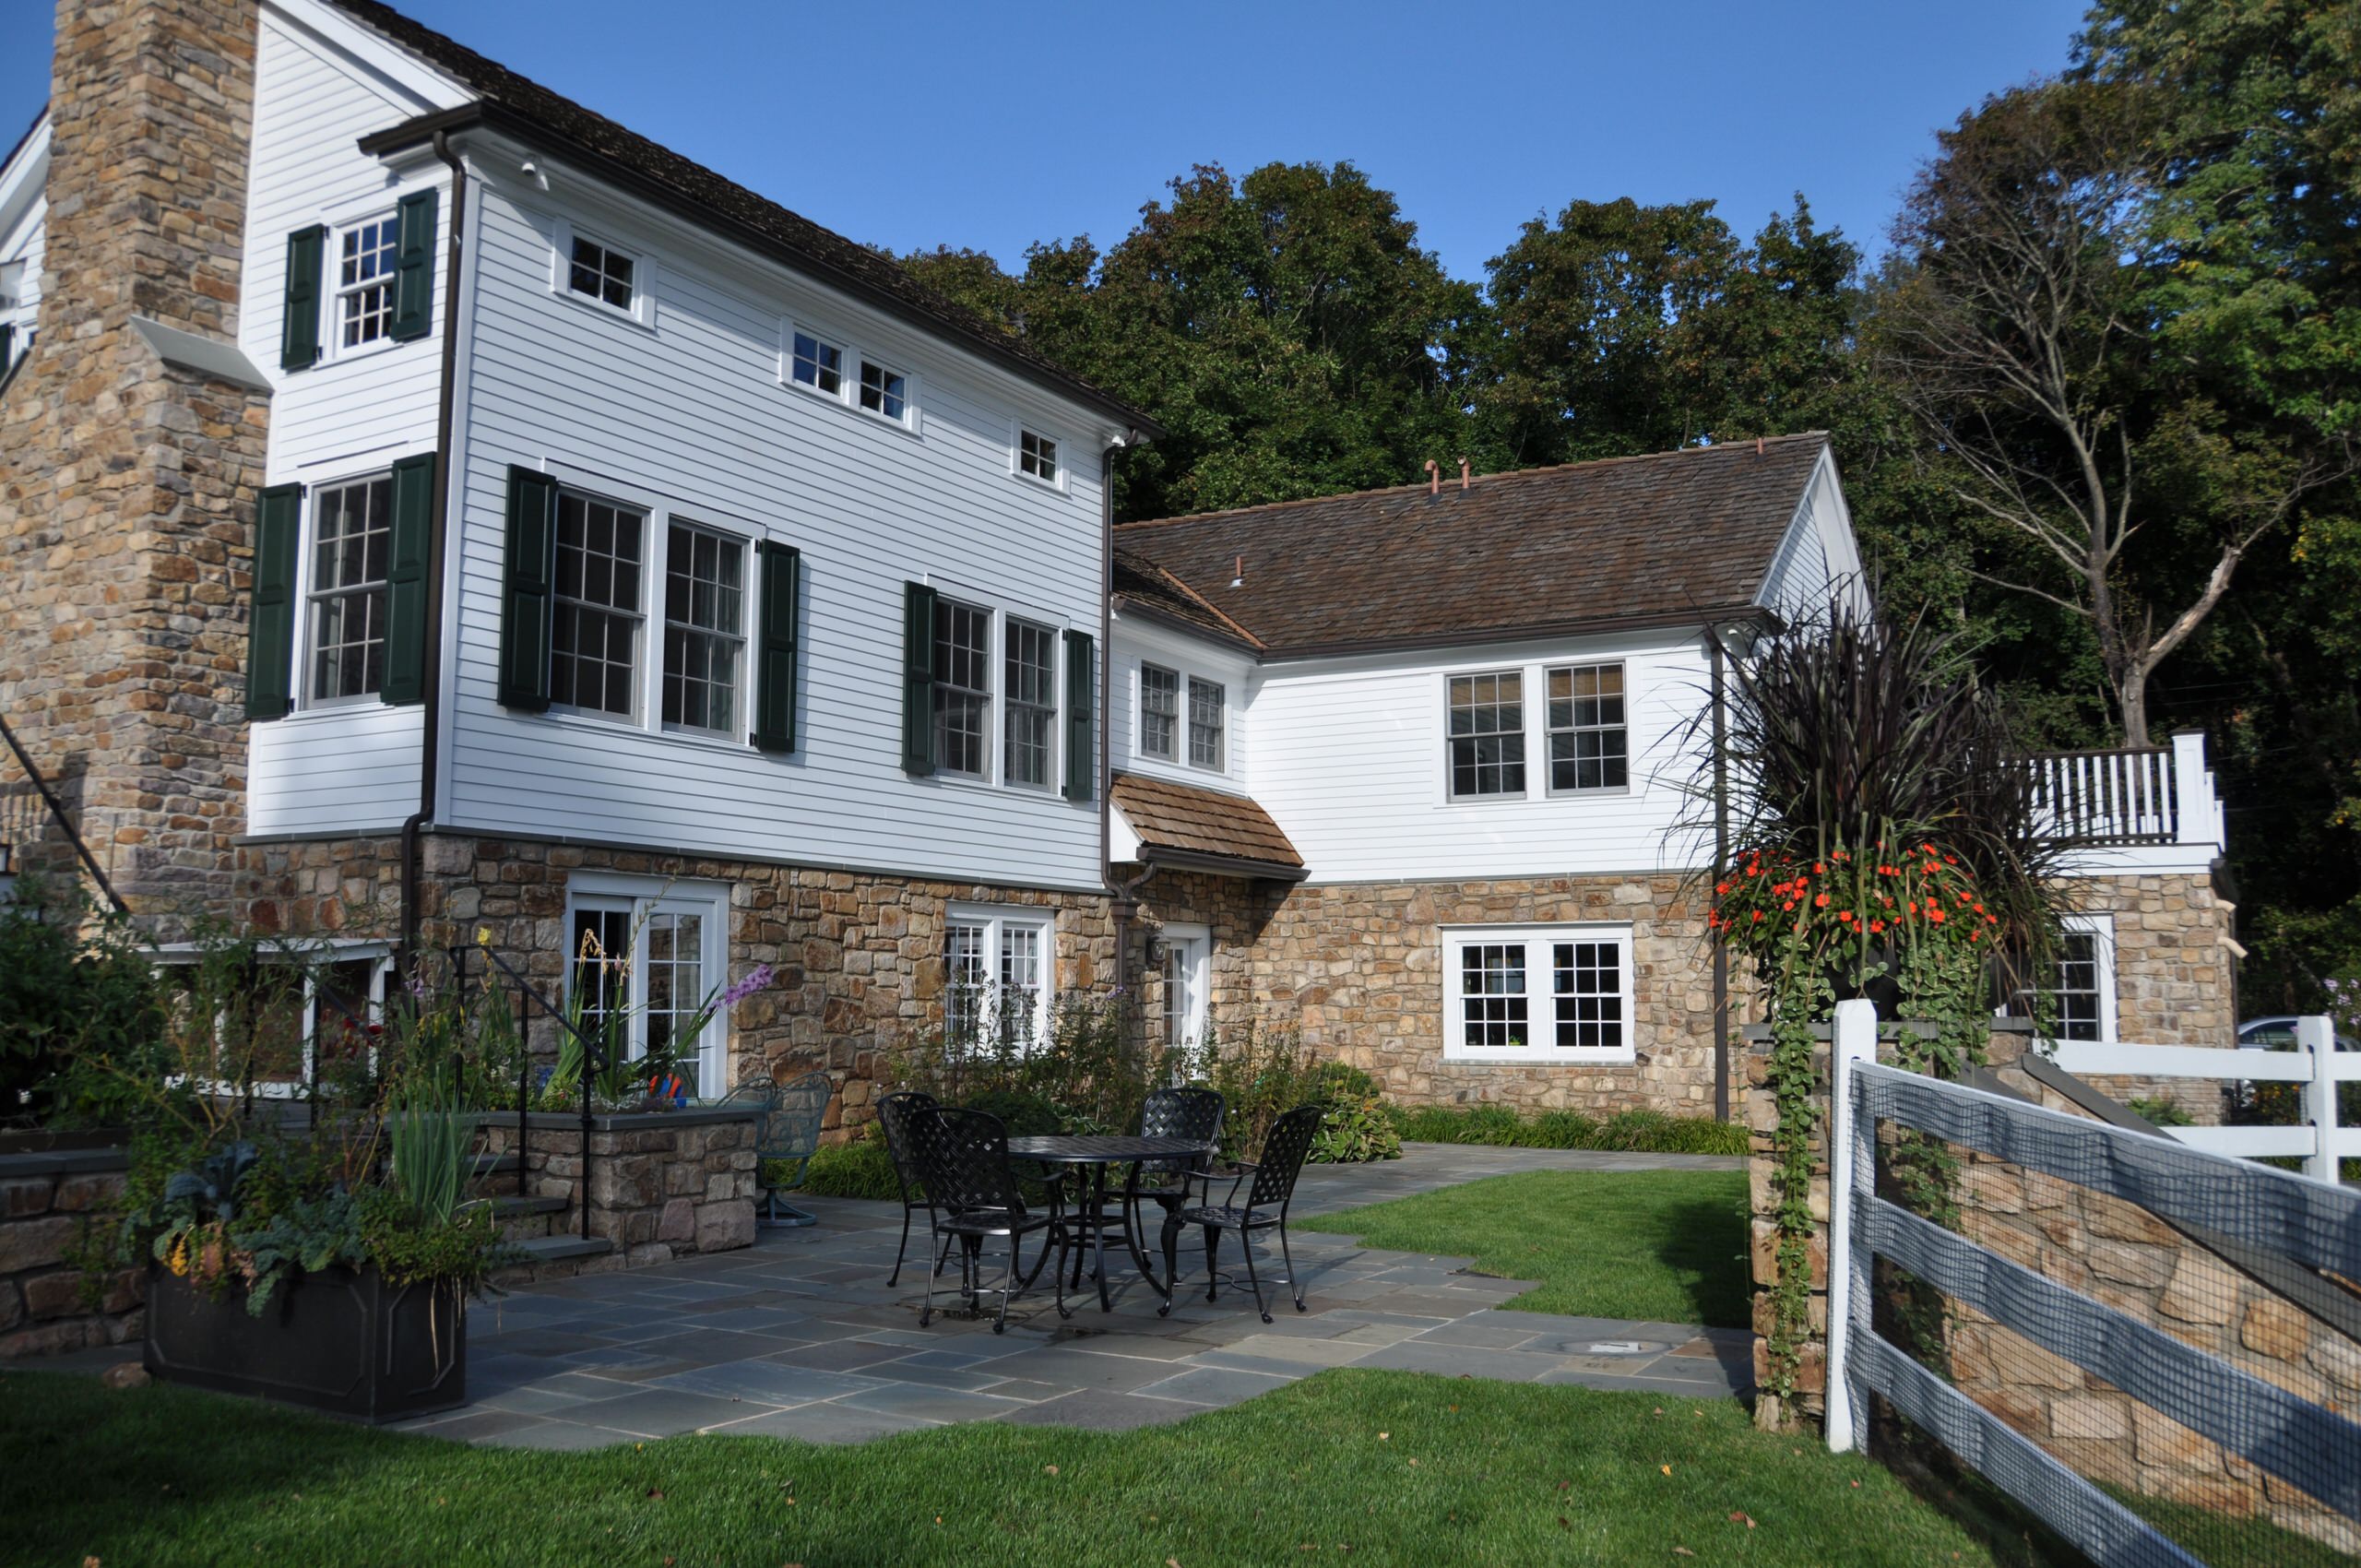 Historic Federal Period Residence in Bernardsville, New Jersey